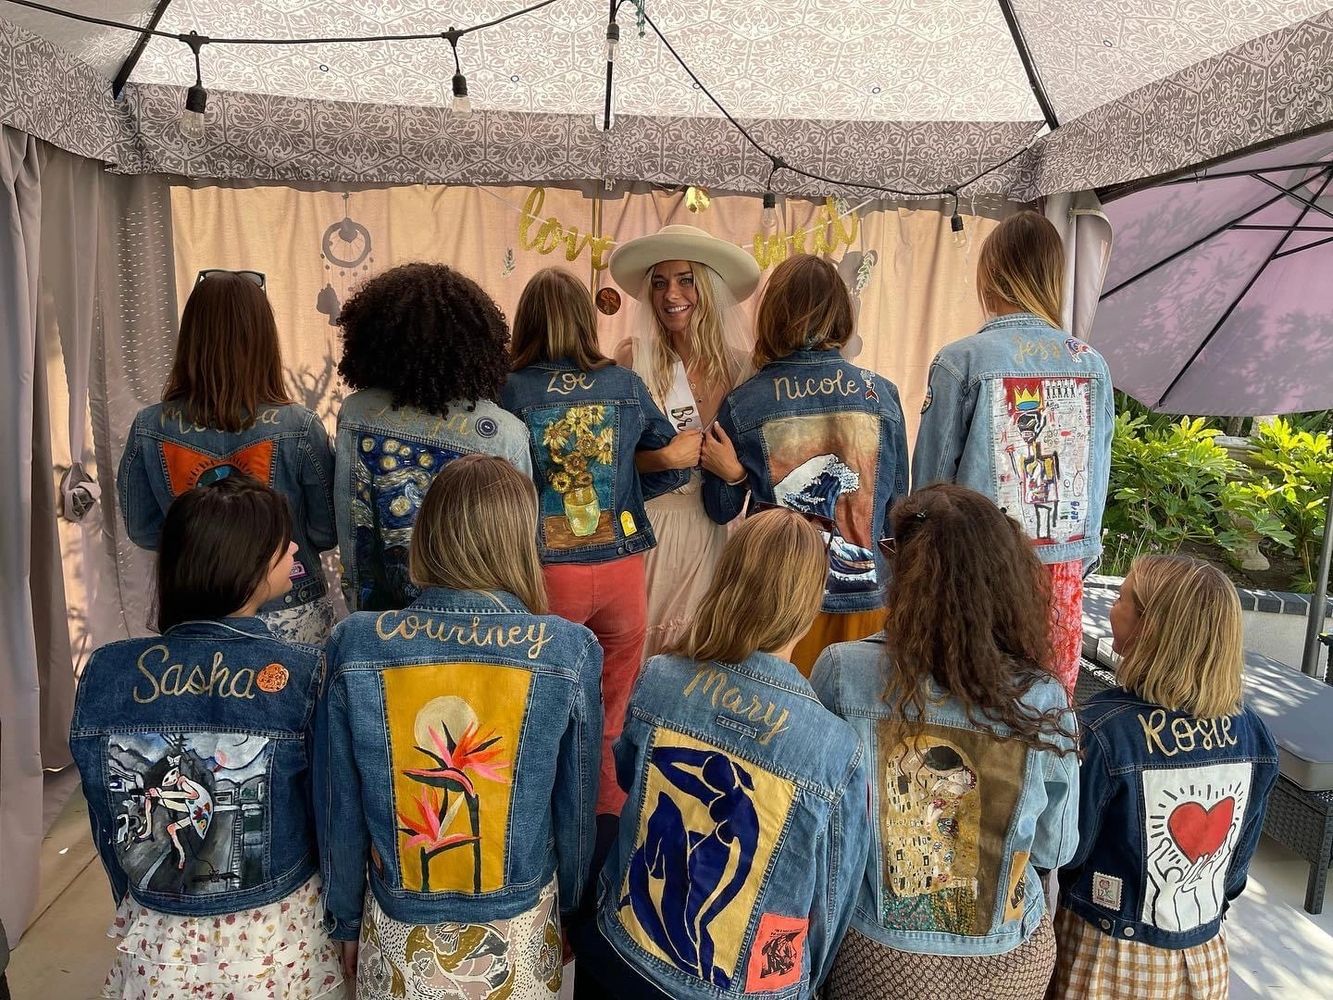 Image of Jacket Designer Kirra Bixby with 10 bridesmaids and their custom painted jean jackets